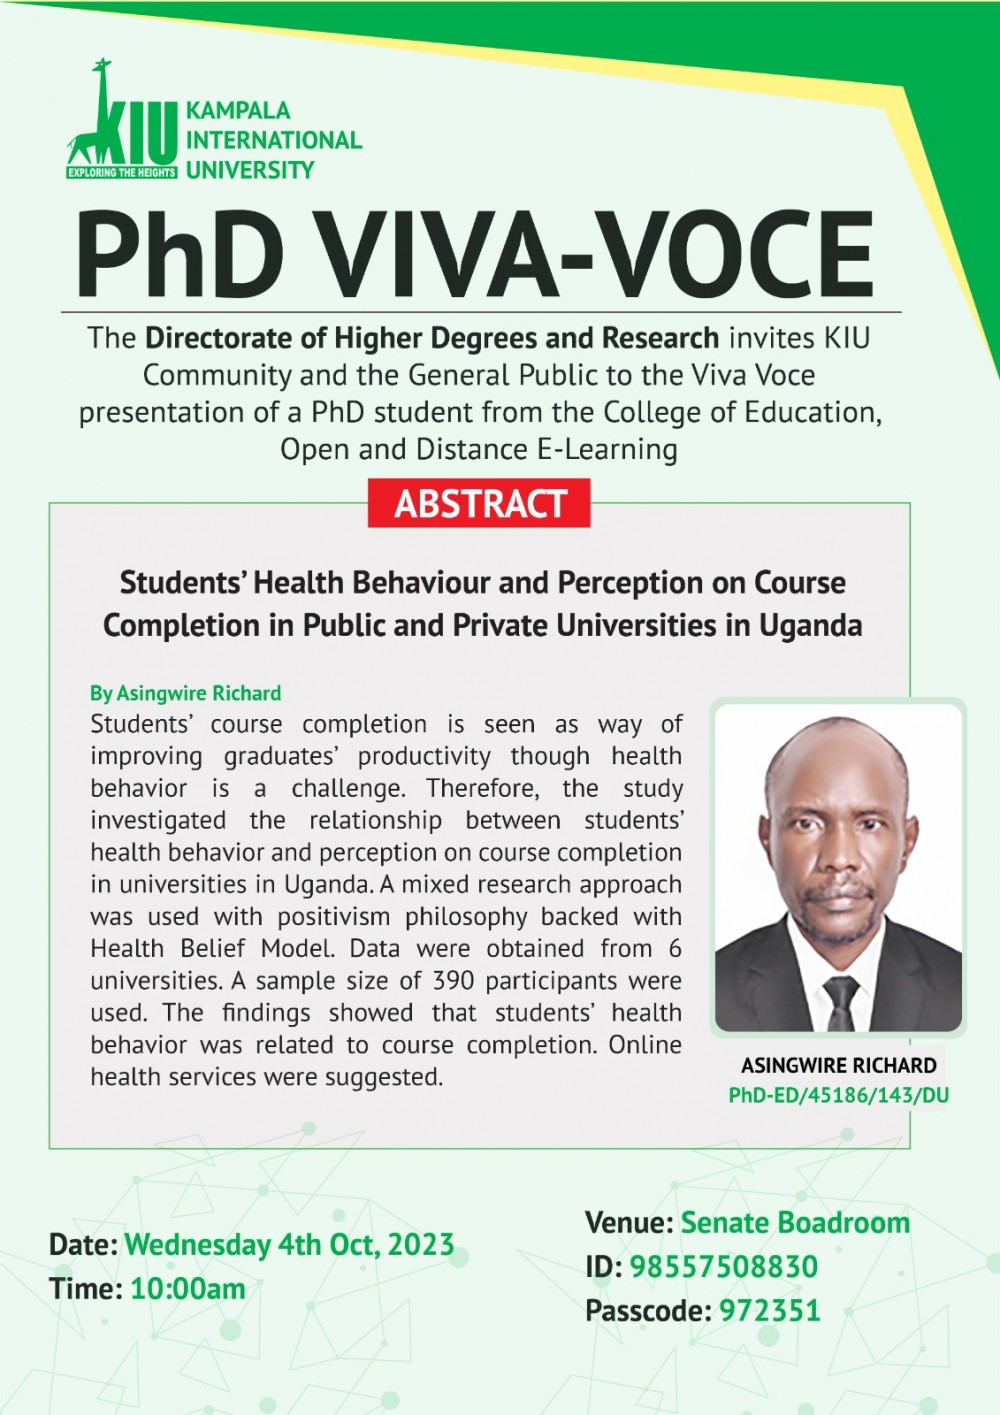 Directorate of Higher Degrees and Research to Hold PhD Viva Voce on October 4th, 2023